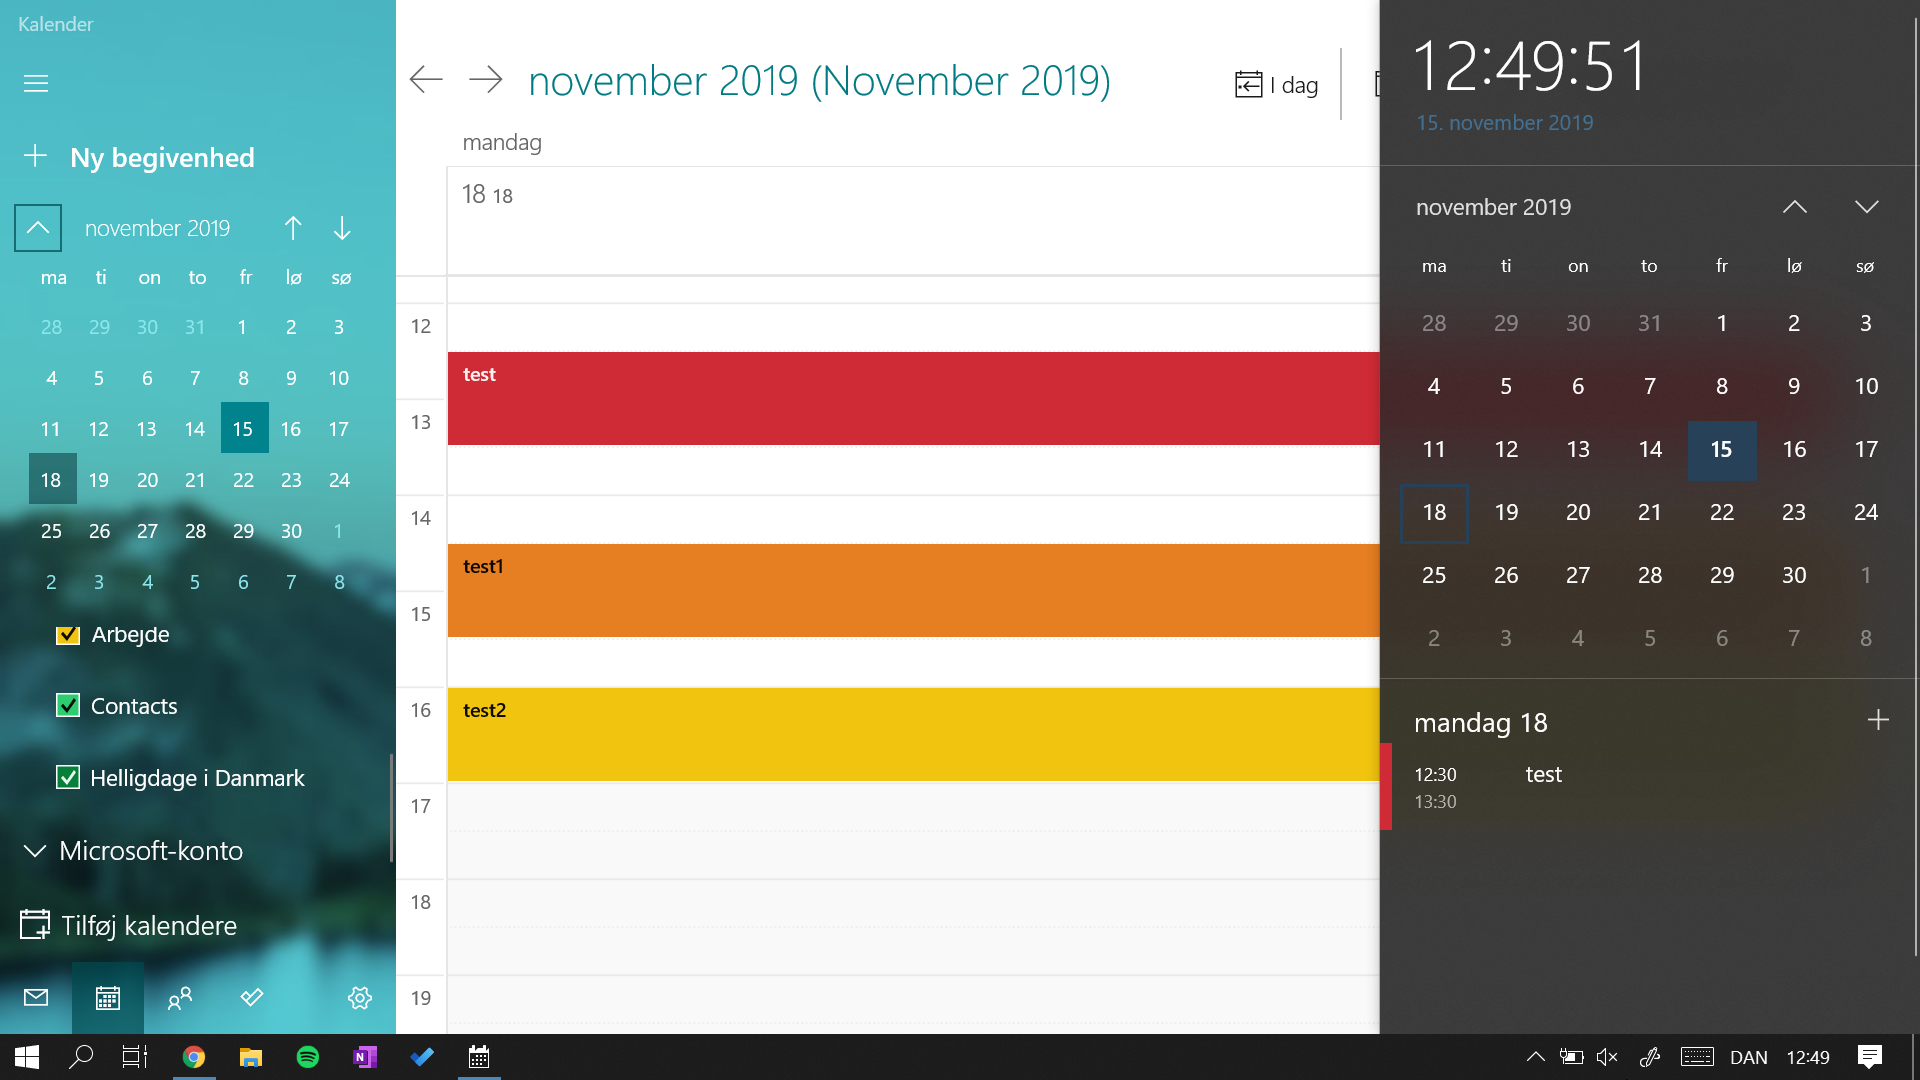 Google Calender sync does not show all calenders in agenda 9c54f4cd-5e97-474a-bd6a-423b484f38d2?upload=true.png